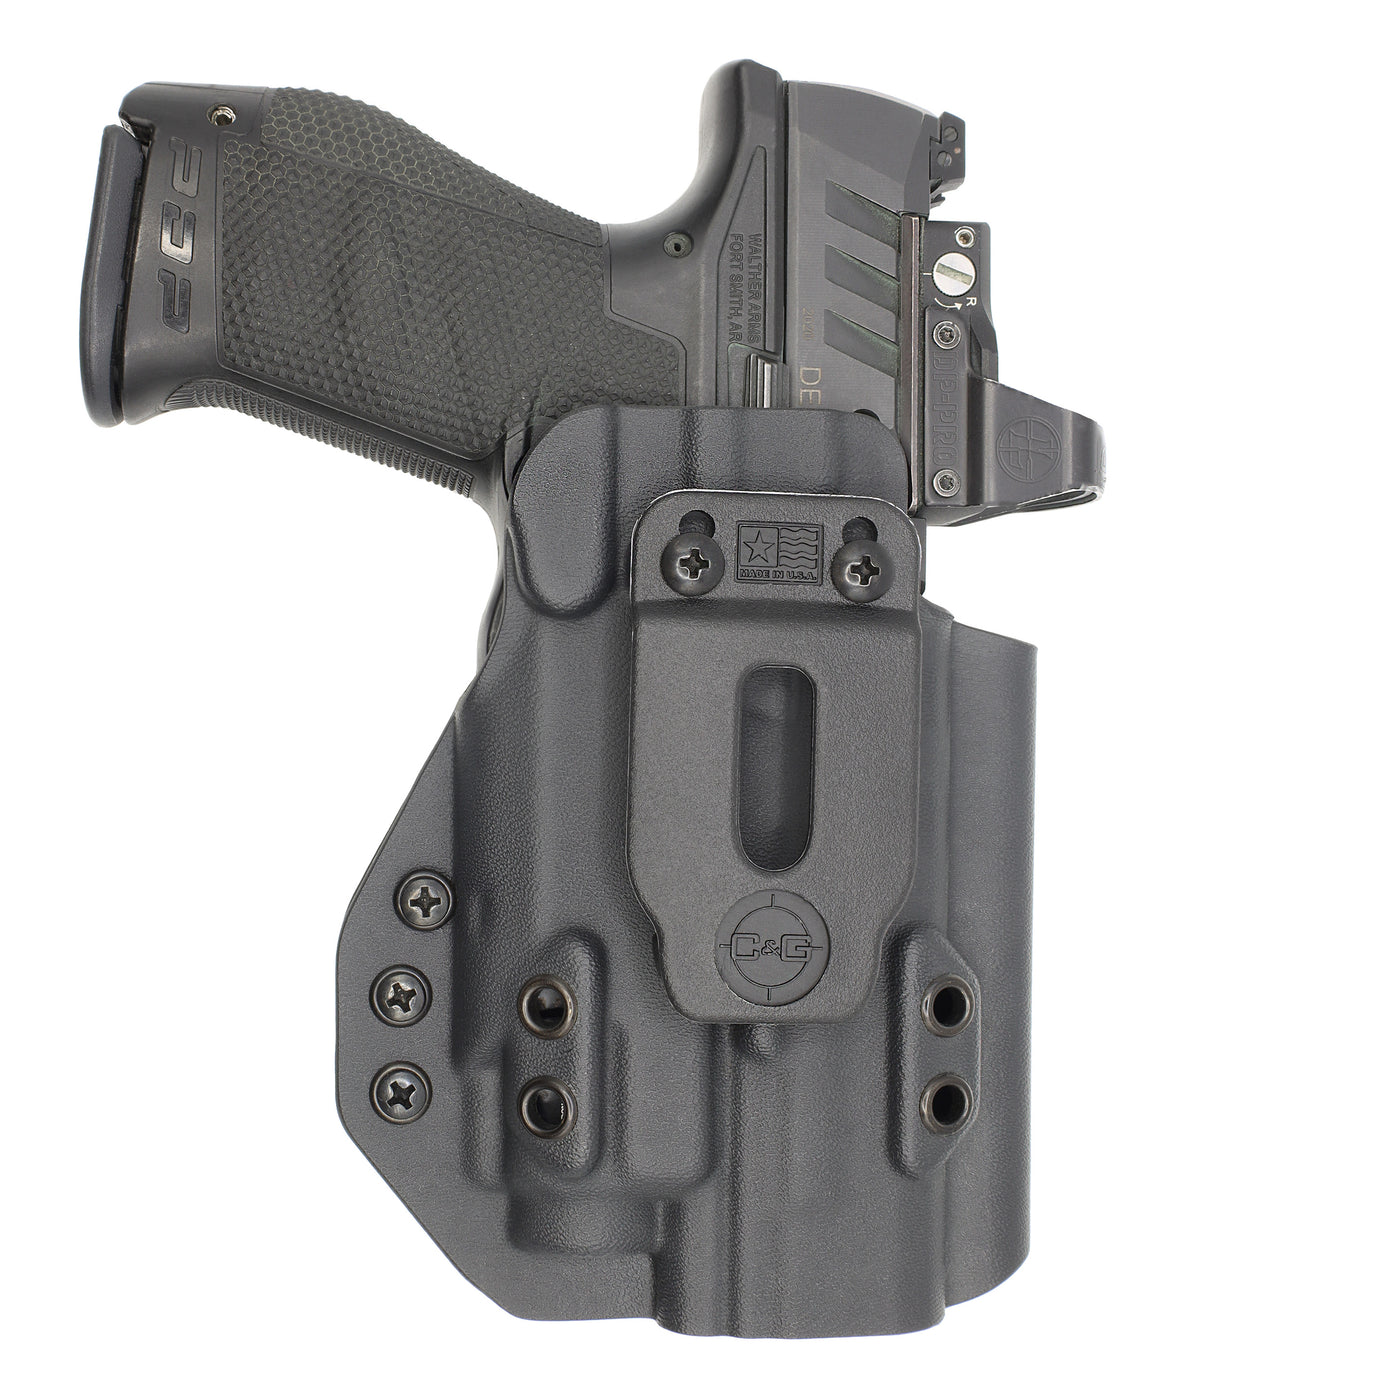 C&G Holsters quickship IWB Tactical FN 509 streamlight TLR8 holstered